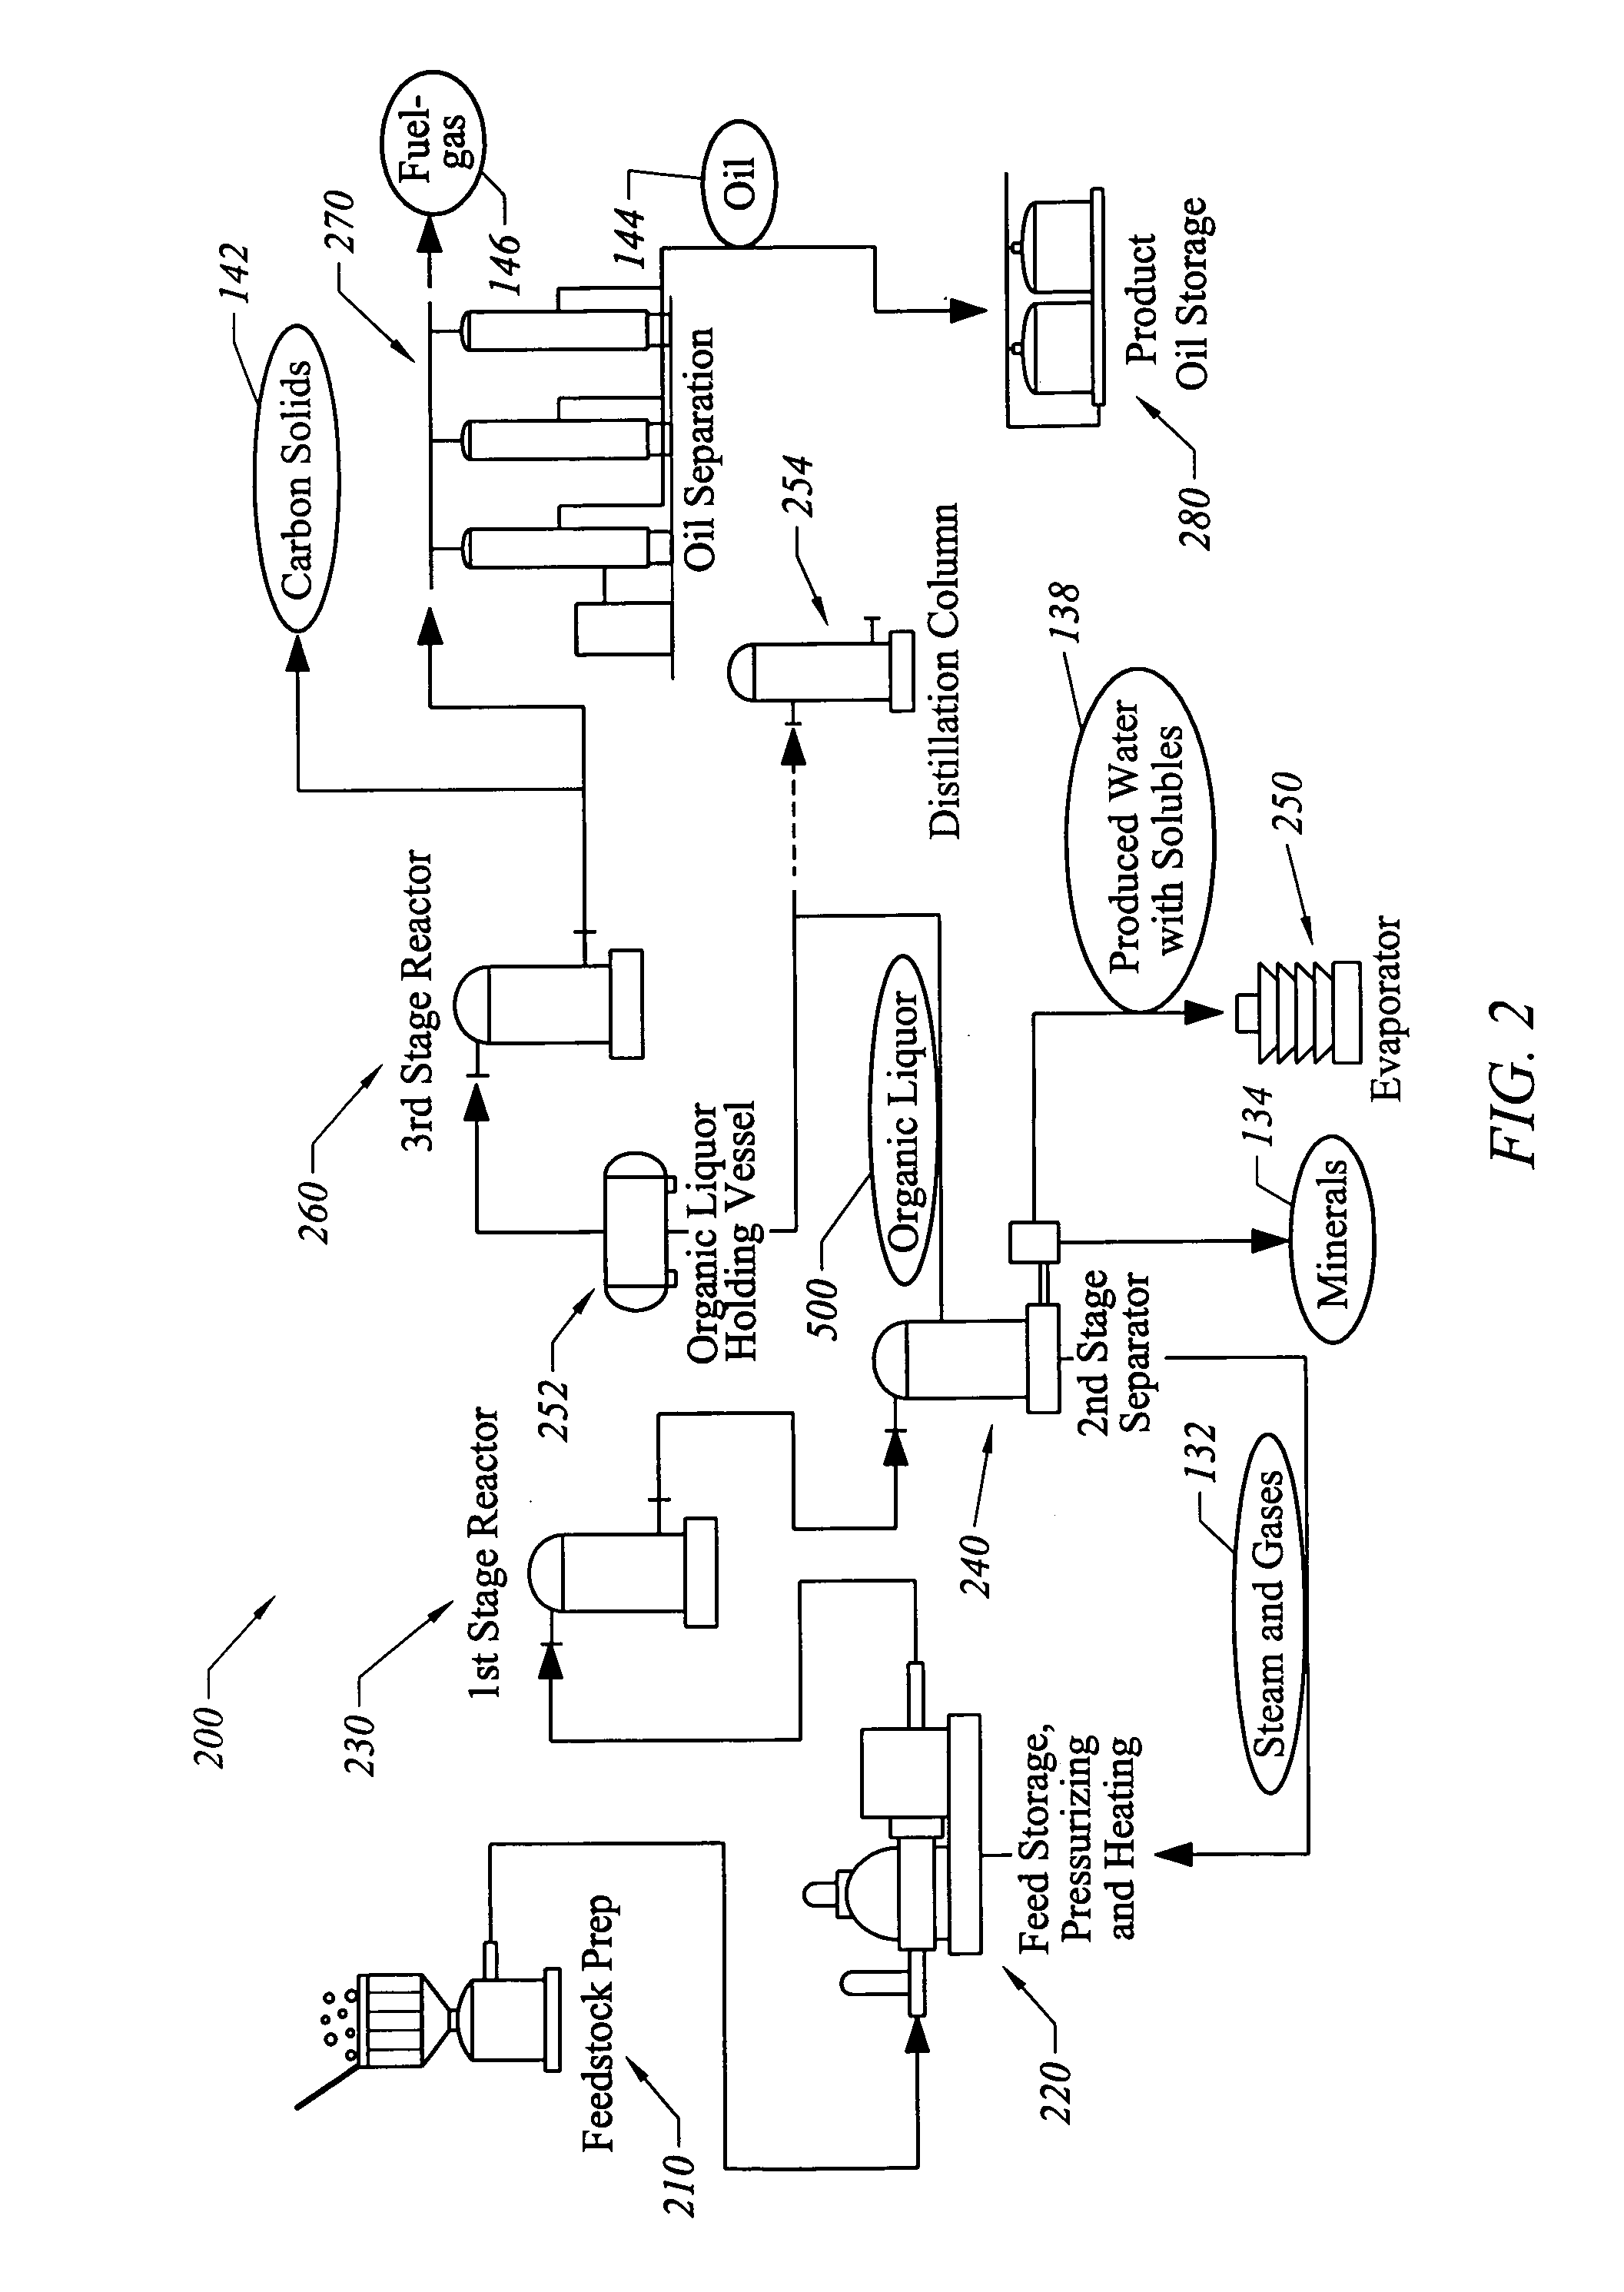 Apparatus for separating particulates from a suspension, and uses thereof